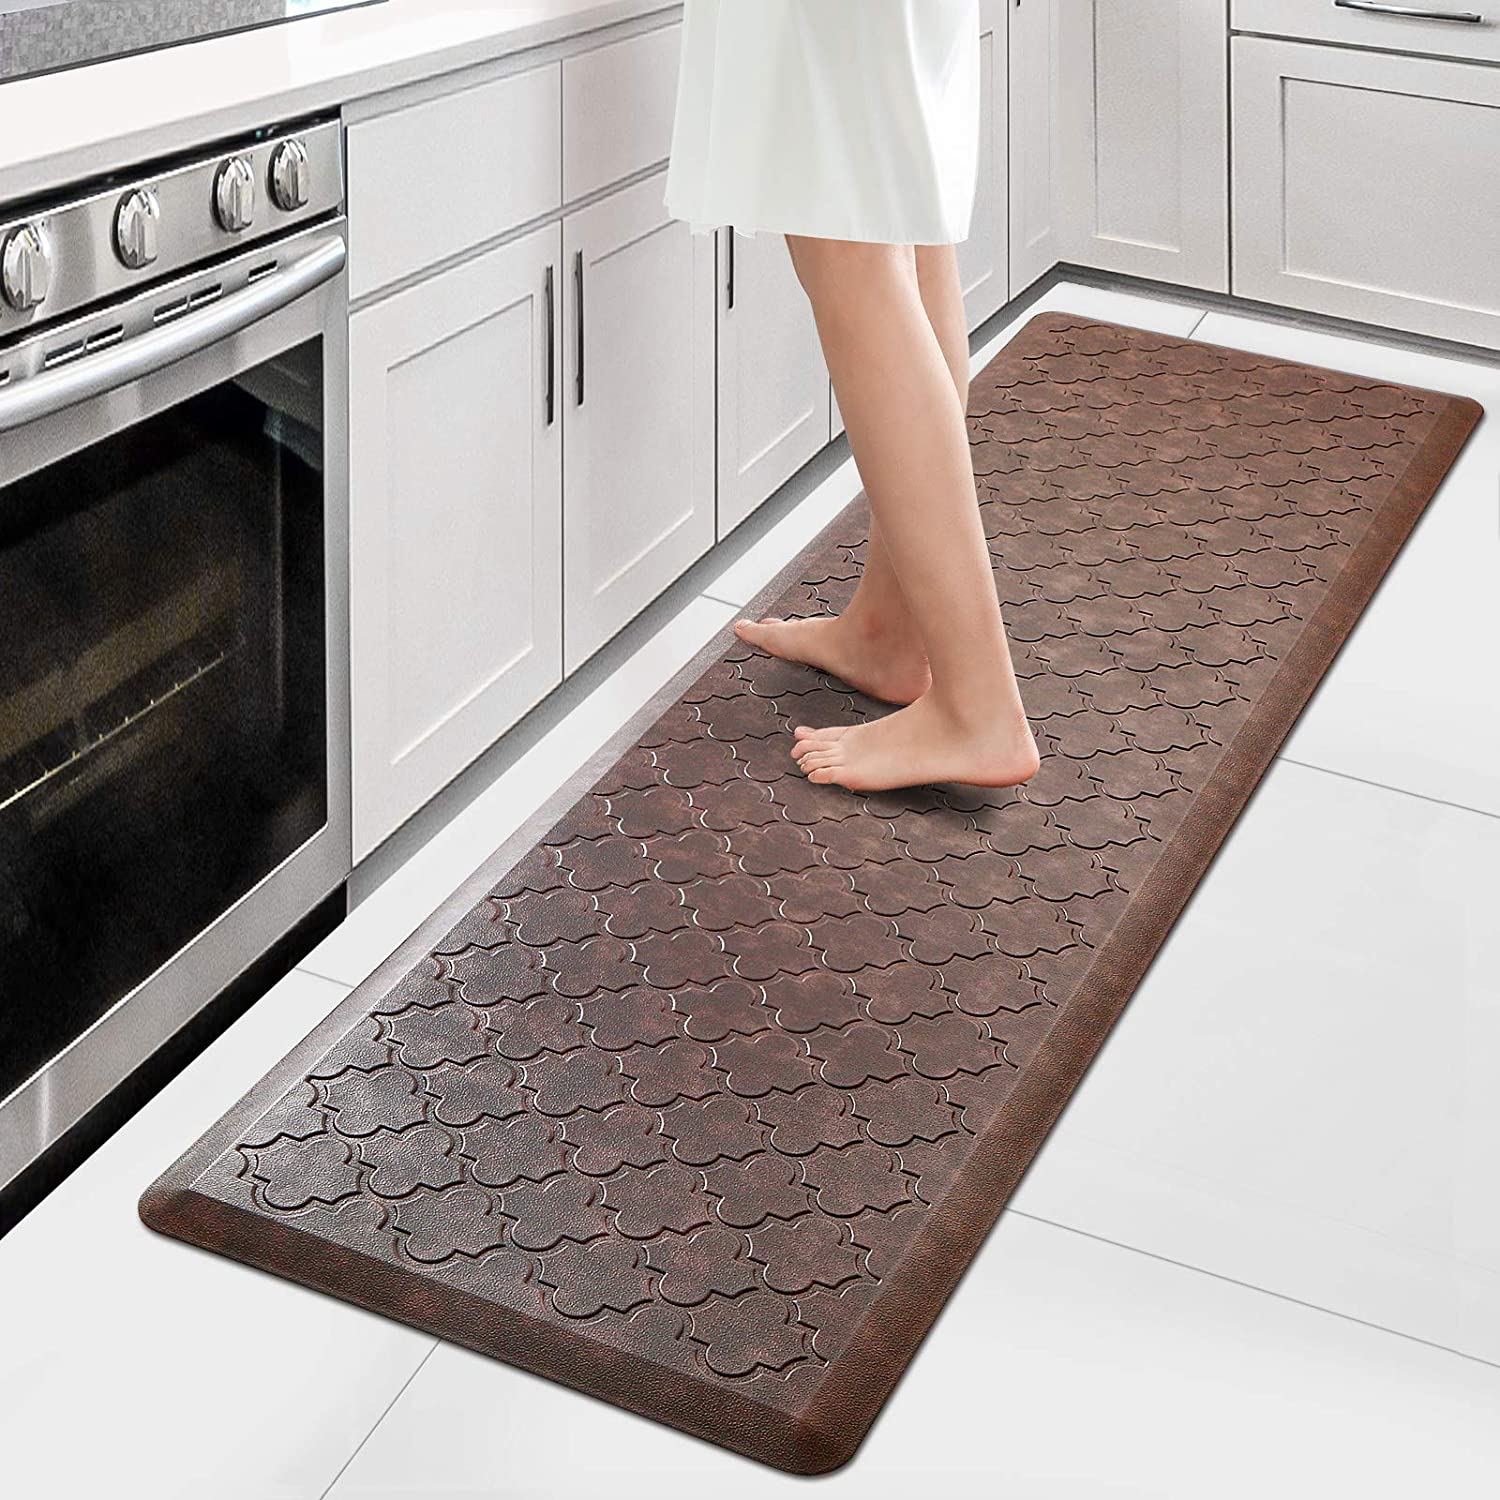 WiseLife Kitchen Mat Cushioned Anti Fatigue Floor Mat,17.3" x59" , Thick ...